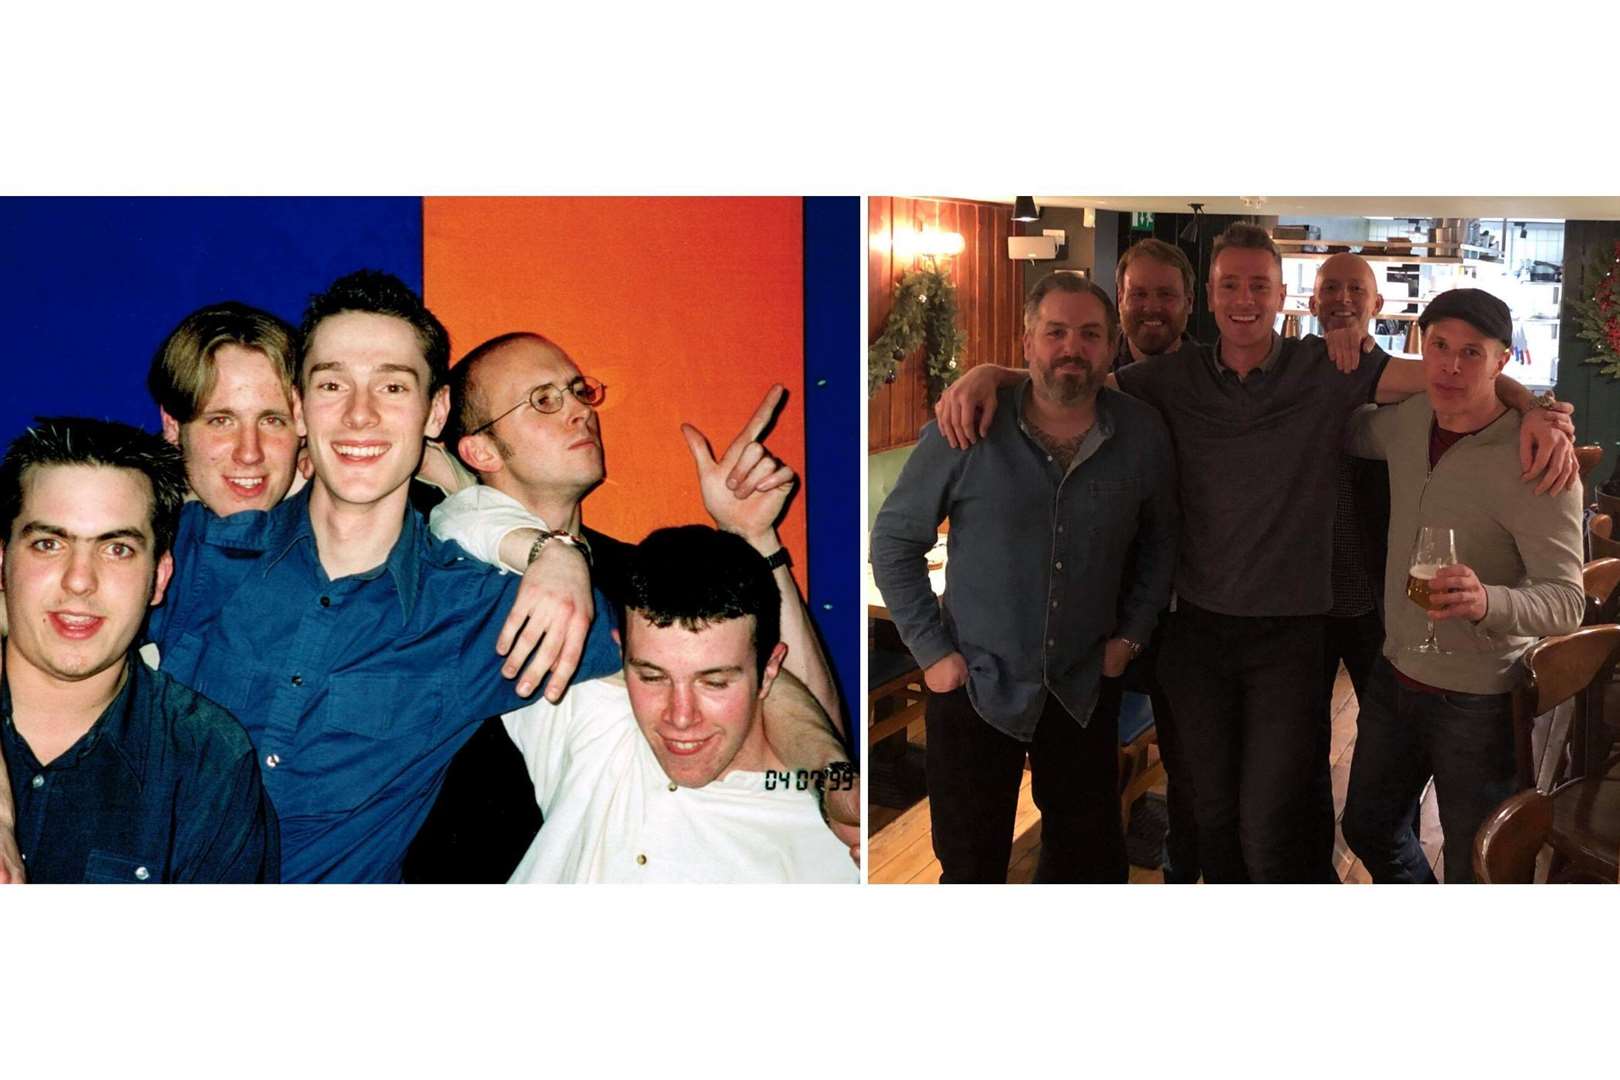 Euston at their first gig at The Verge in Kentish Town, Camden on April 7, 1999 and last year at The Rose Hotel in Deal